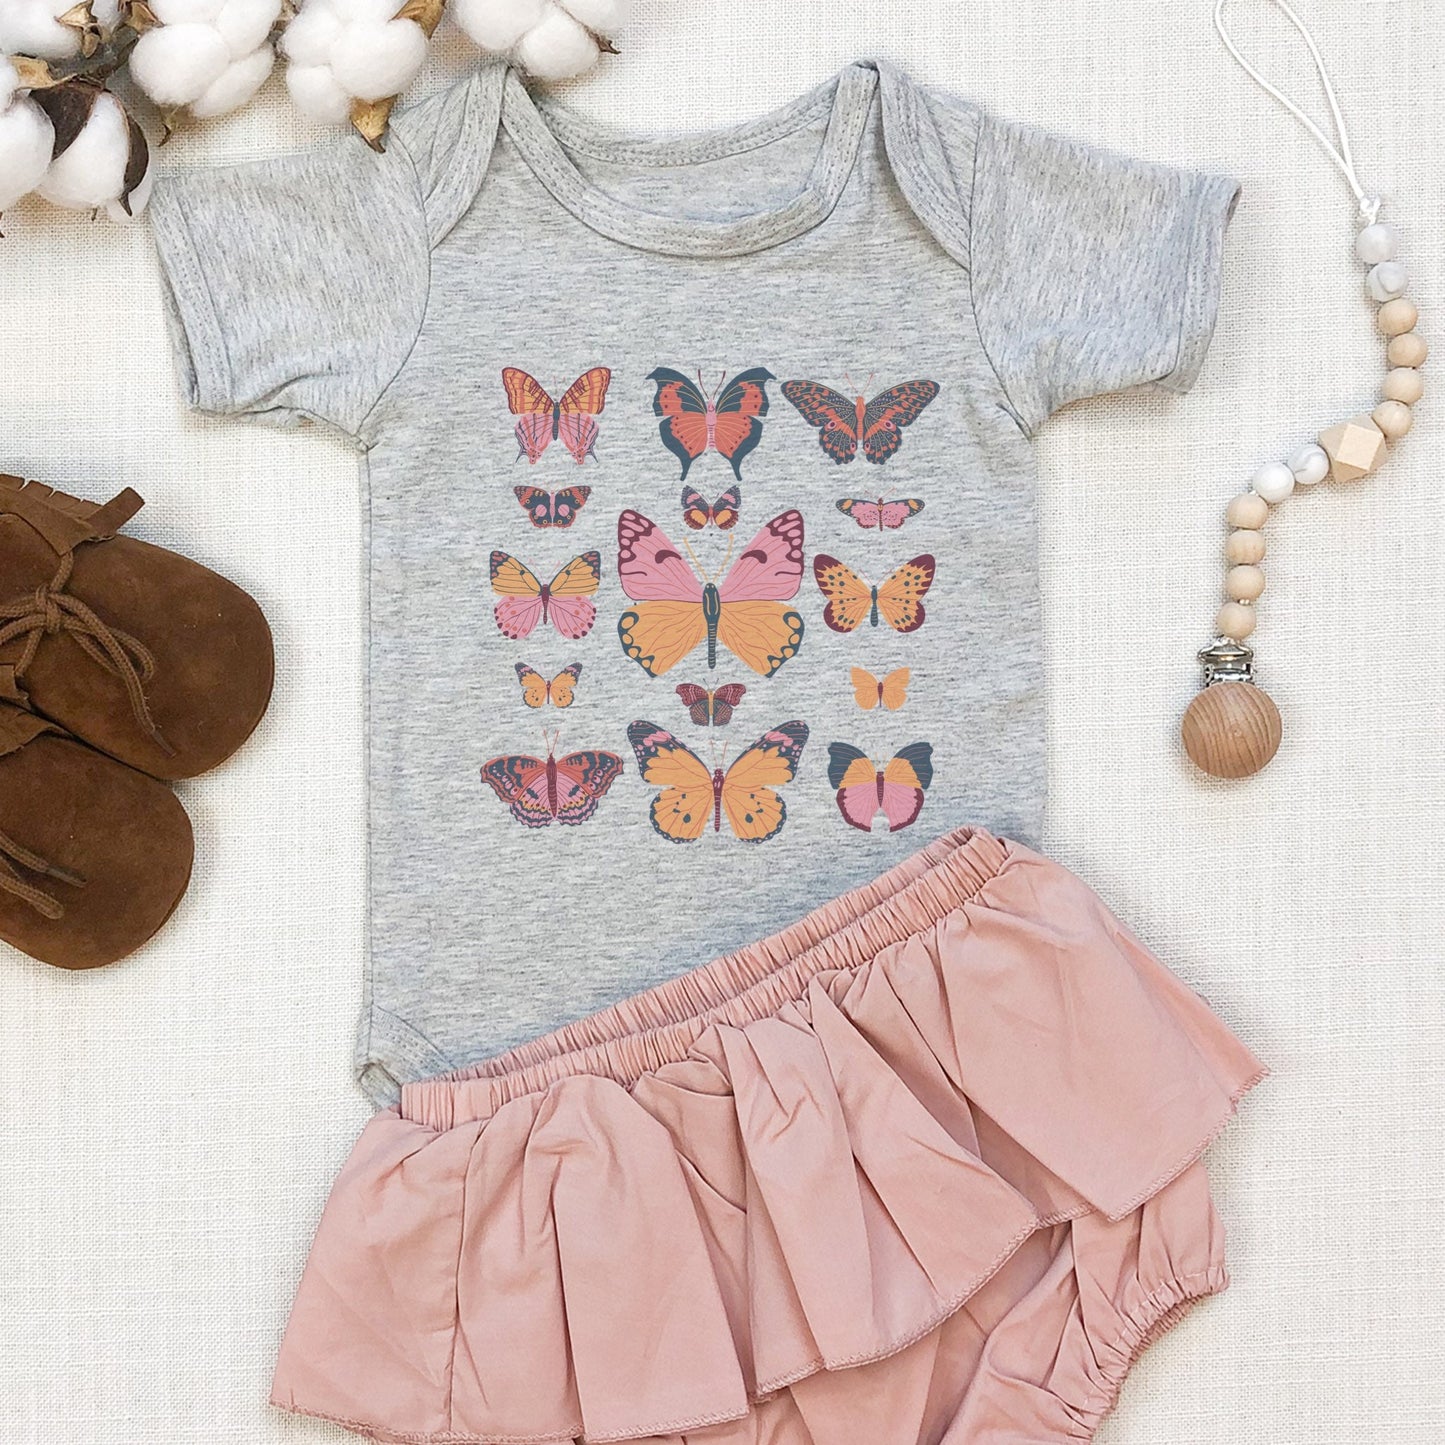 Butterfly Bodysuit for Baby Girl, Cottagecore Baby Girl Clothes, Butterfly Birthday Bodysuit, Fairycore Baby Clothes, Moth Baby Clothes